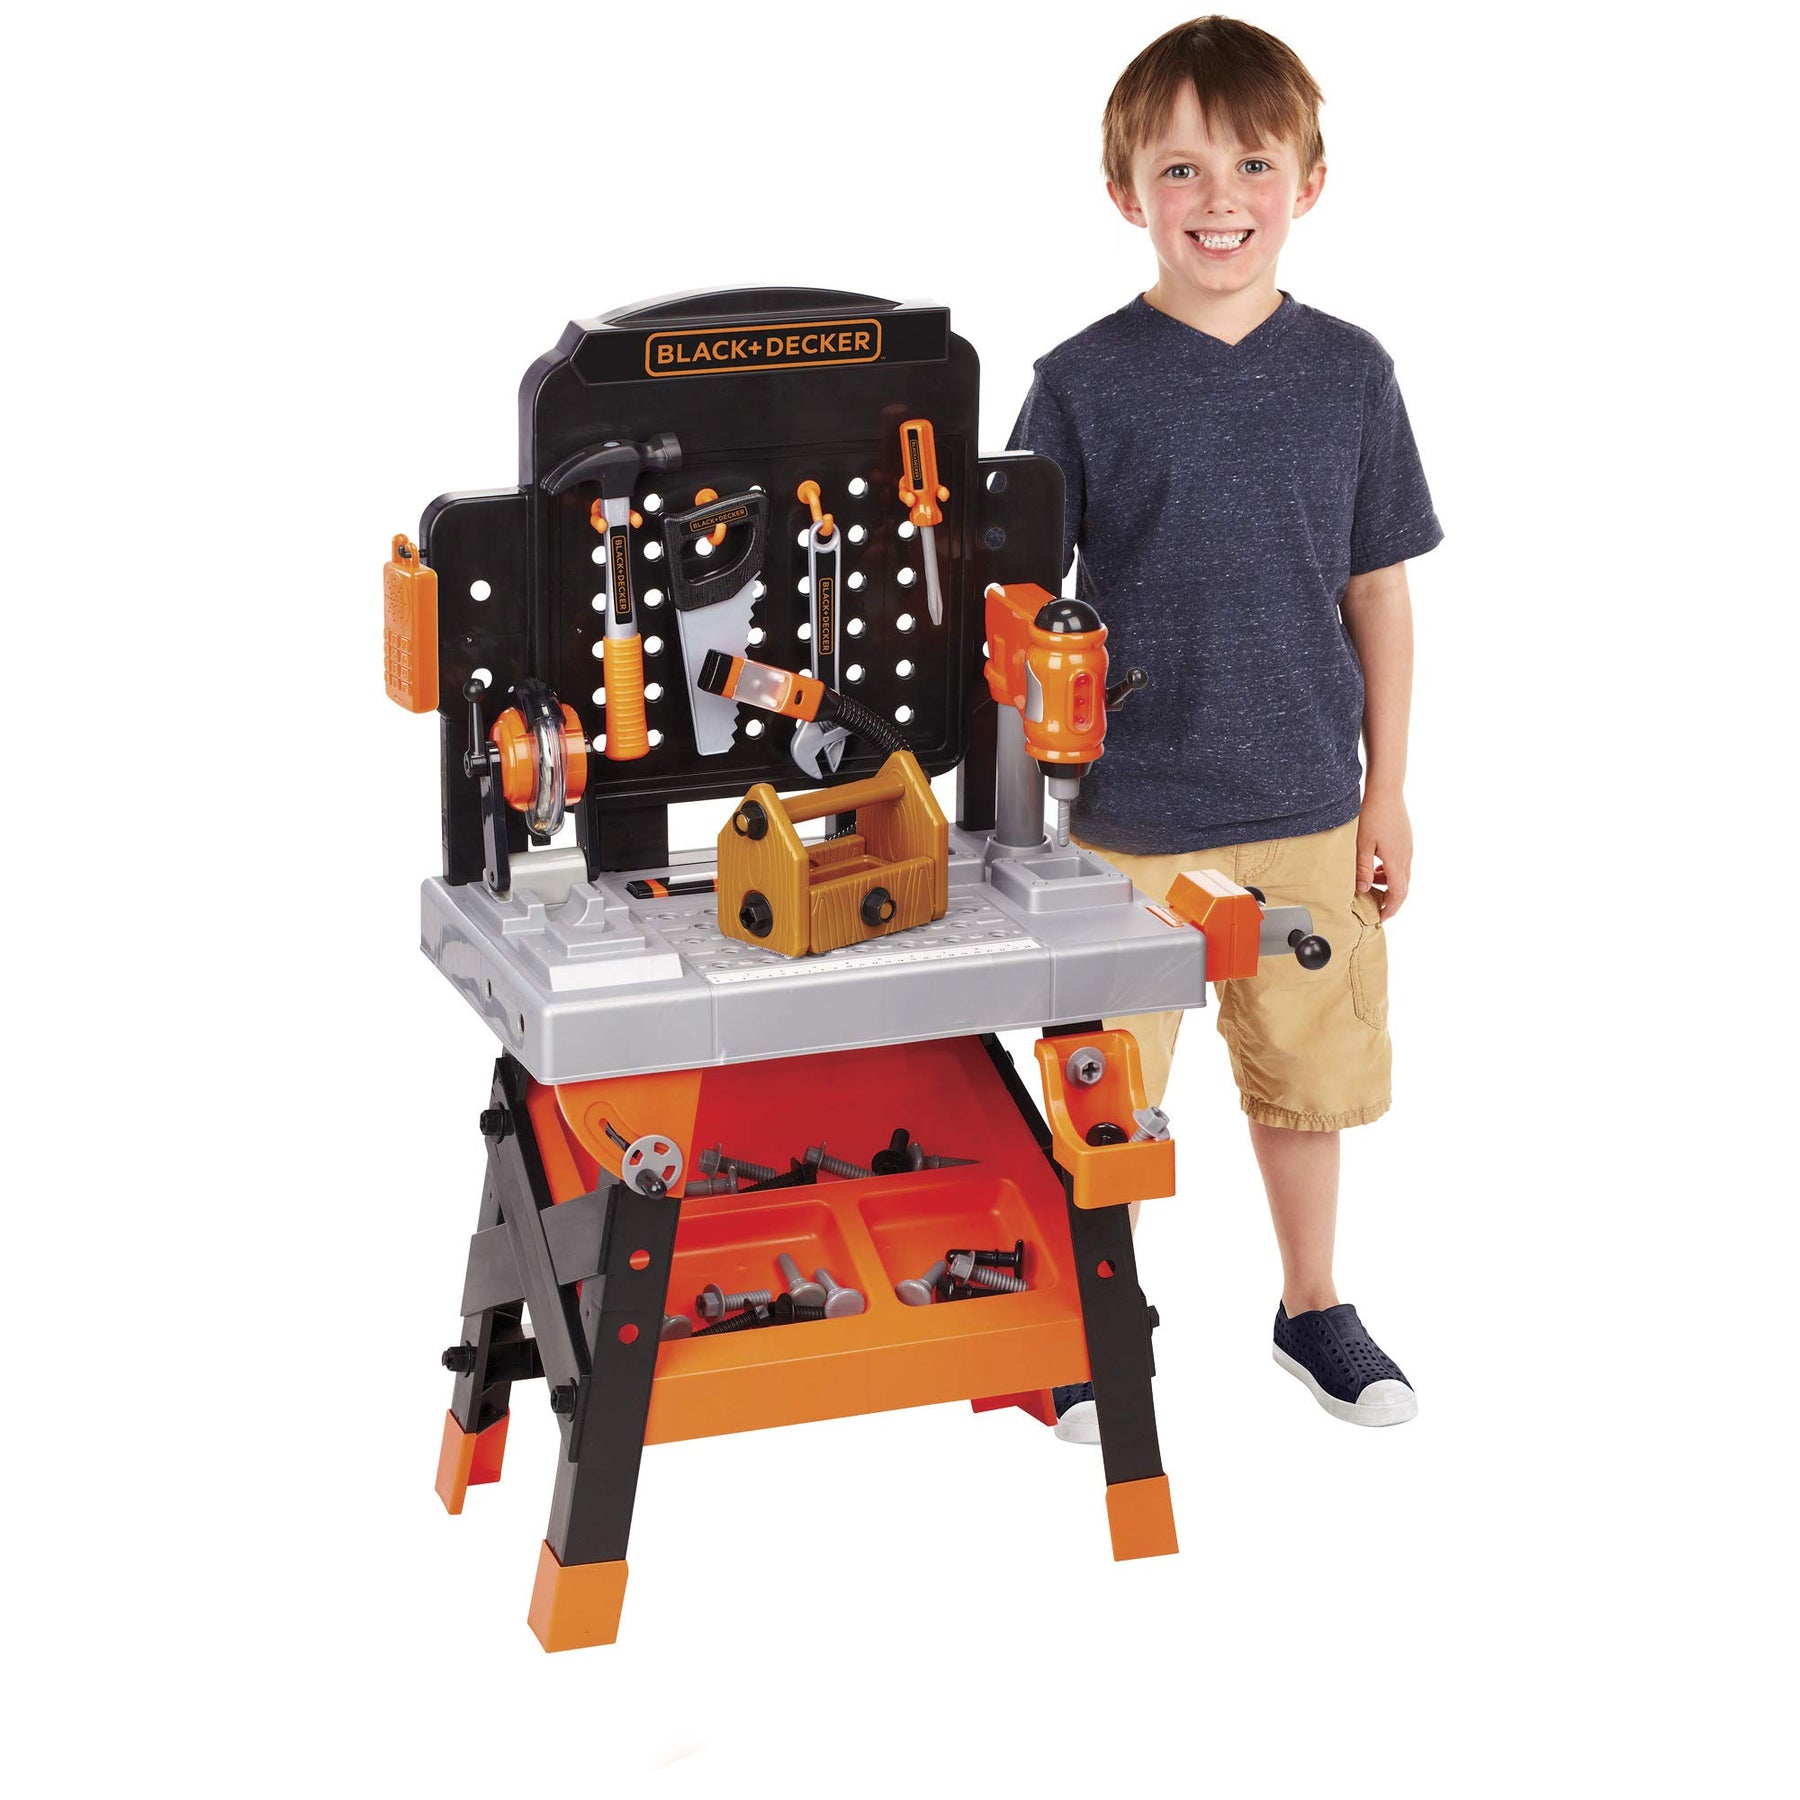 Kids Video Compilation Toy Tool Set Black and Decker Bob the